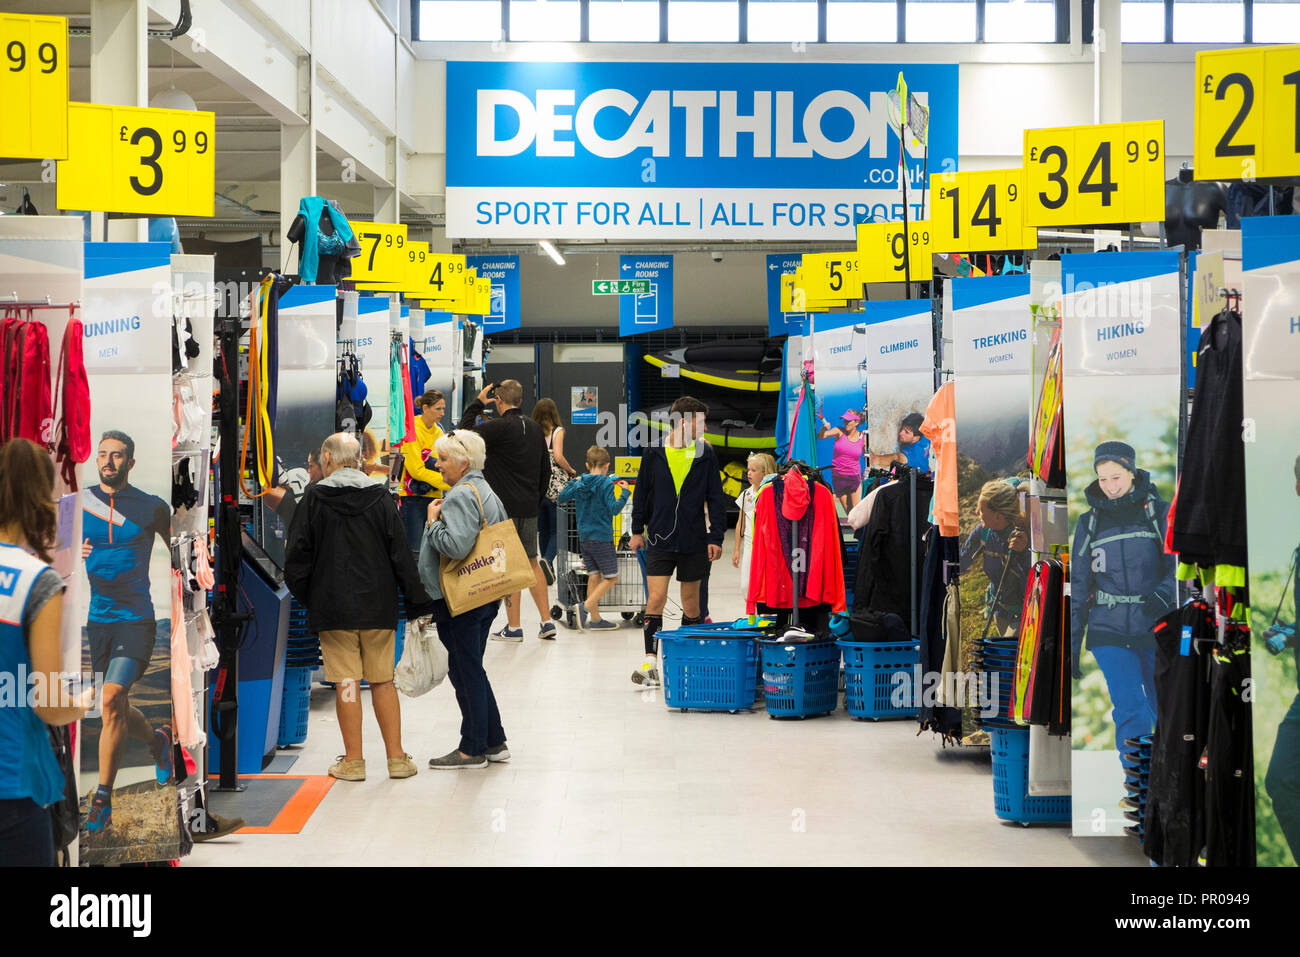 Shop interior / inside of the Decathlon sports / sporting equipment shop / retailer / store in Guildford. Surrey. UK. (102) Stock Photo